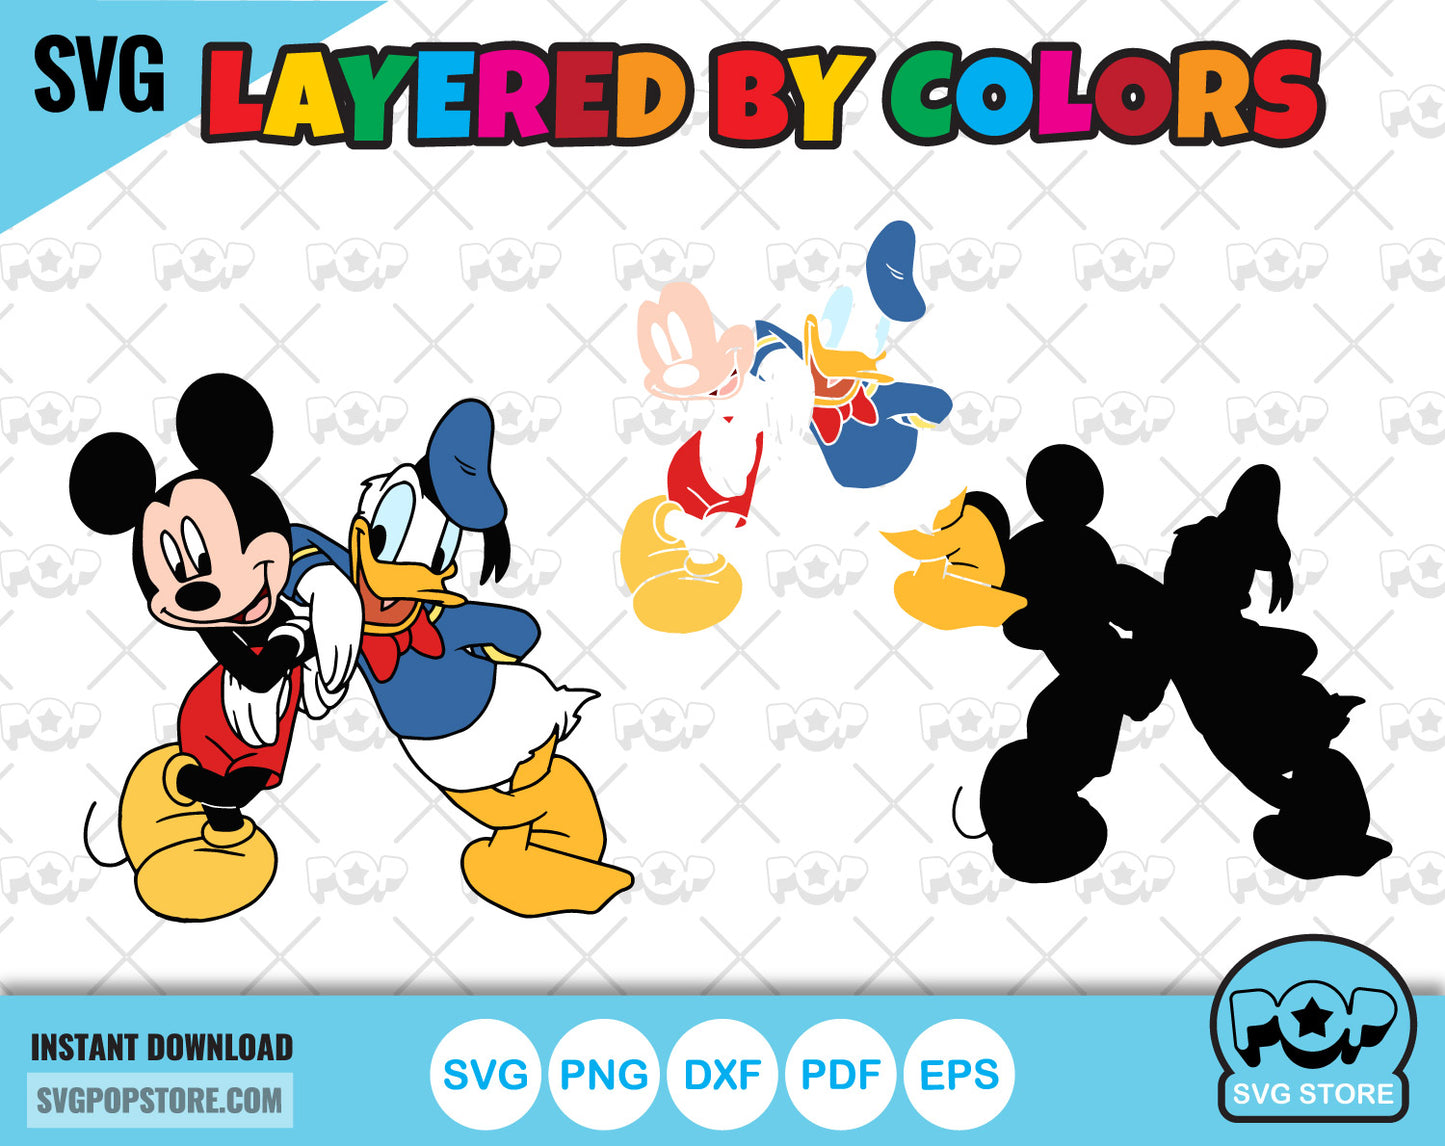 Mickey and Friends 50 cliparts bundle, svg cut files for Cricut / Silhouette, Mickey & friends png, dxf